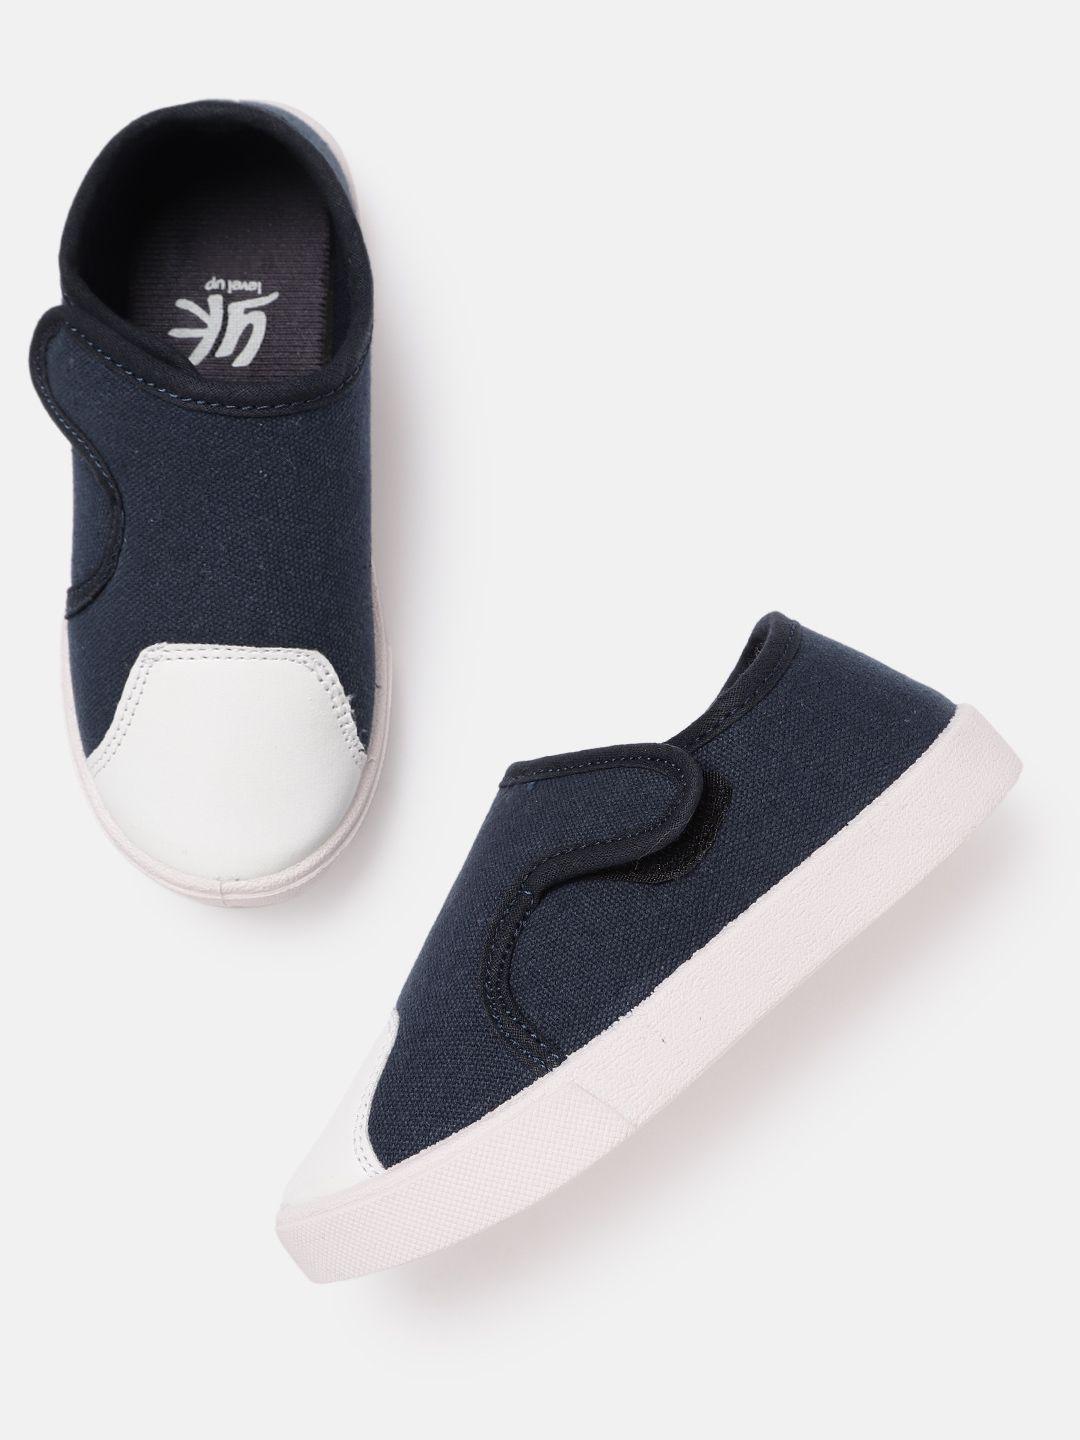 yk boys navy blue & white solid sneakers